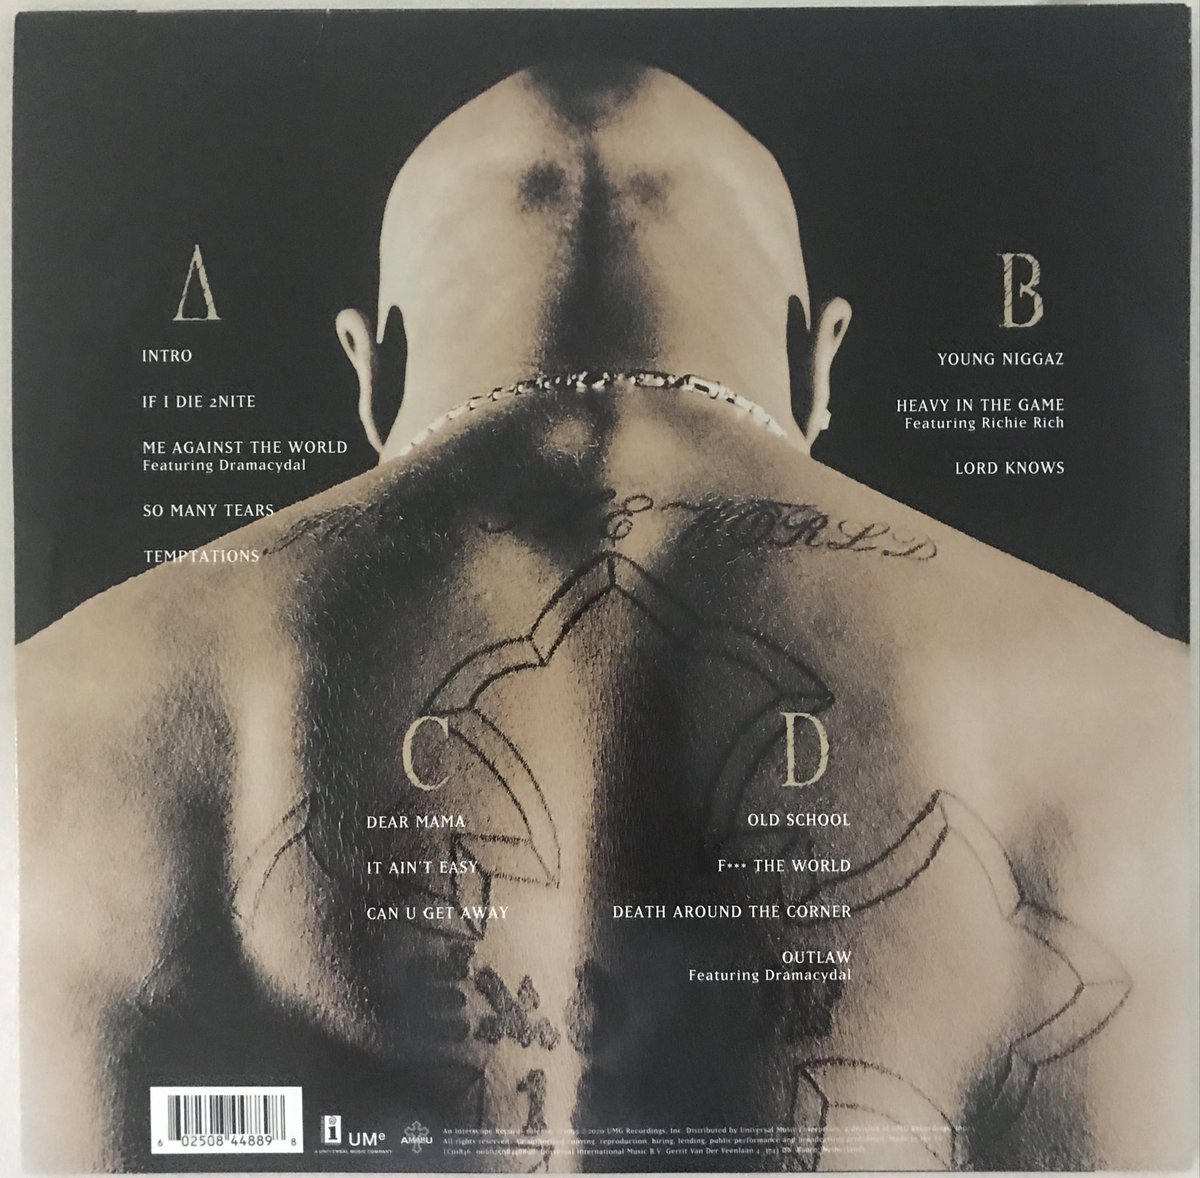 2Pac - Me Against The WorldIncludes:Me Against The World (2xLP)PictureRating: 9/10